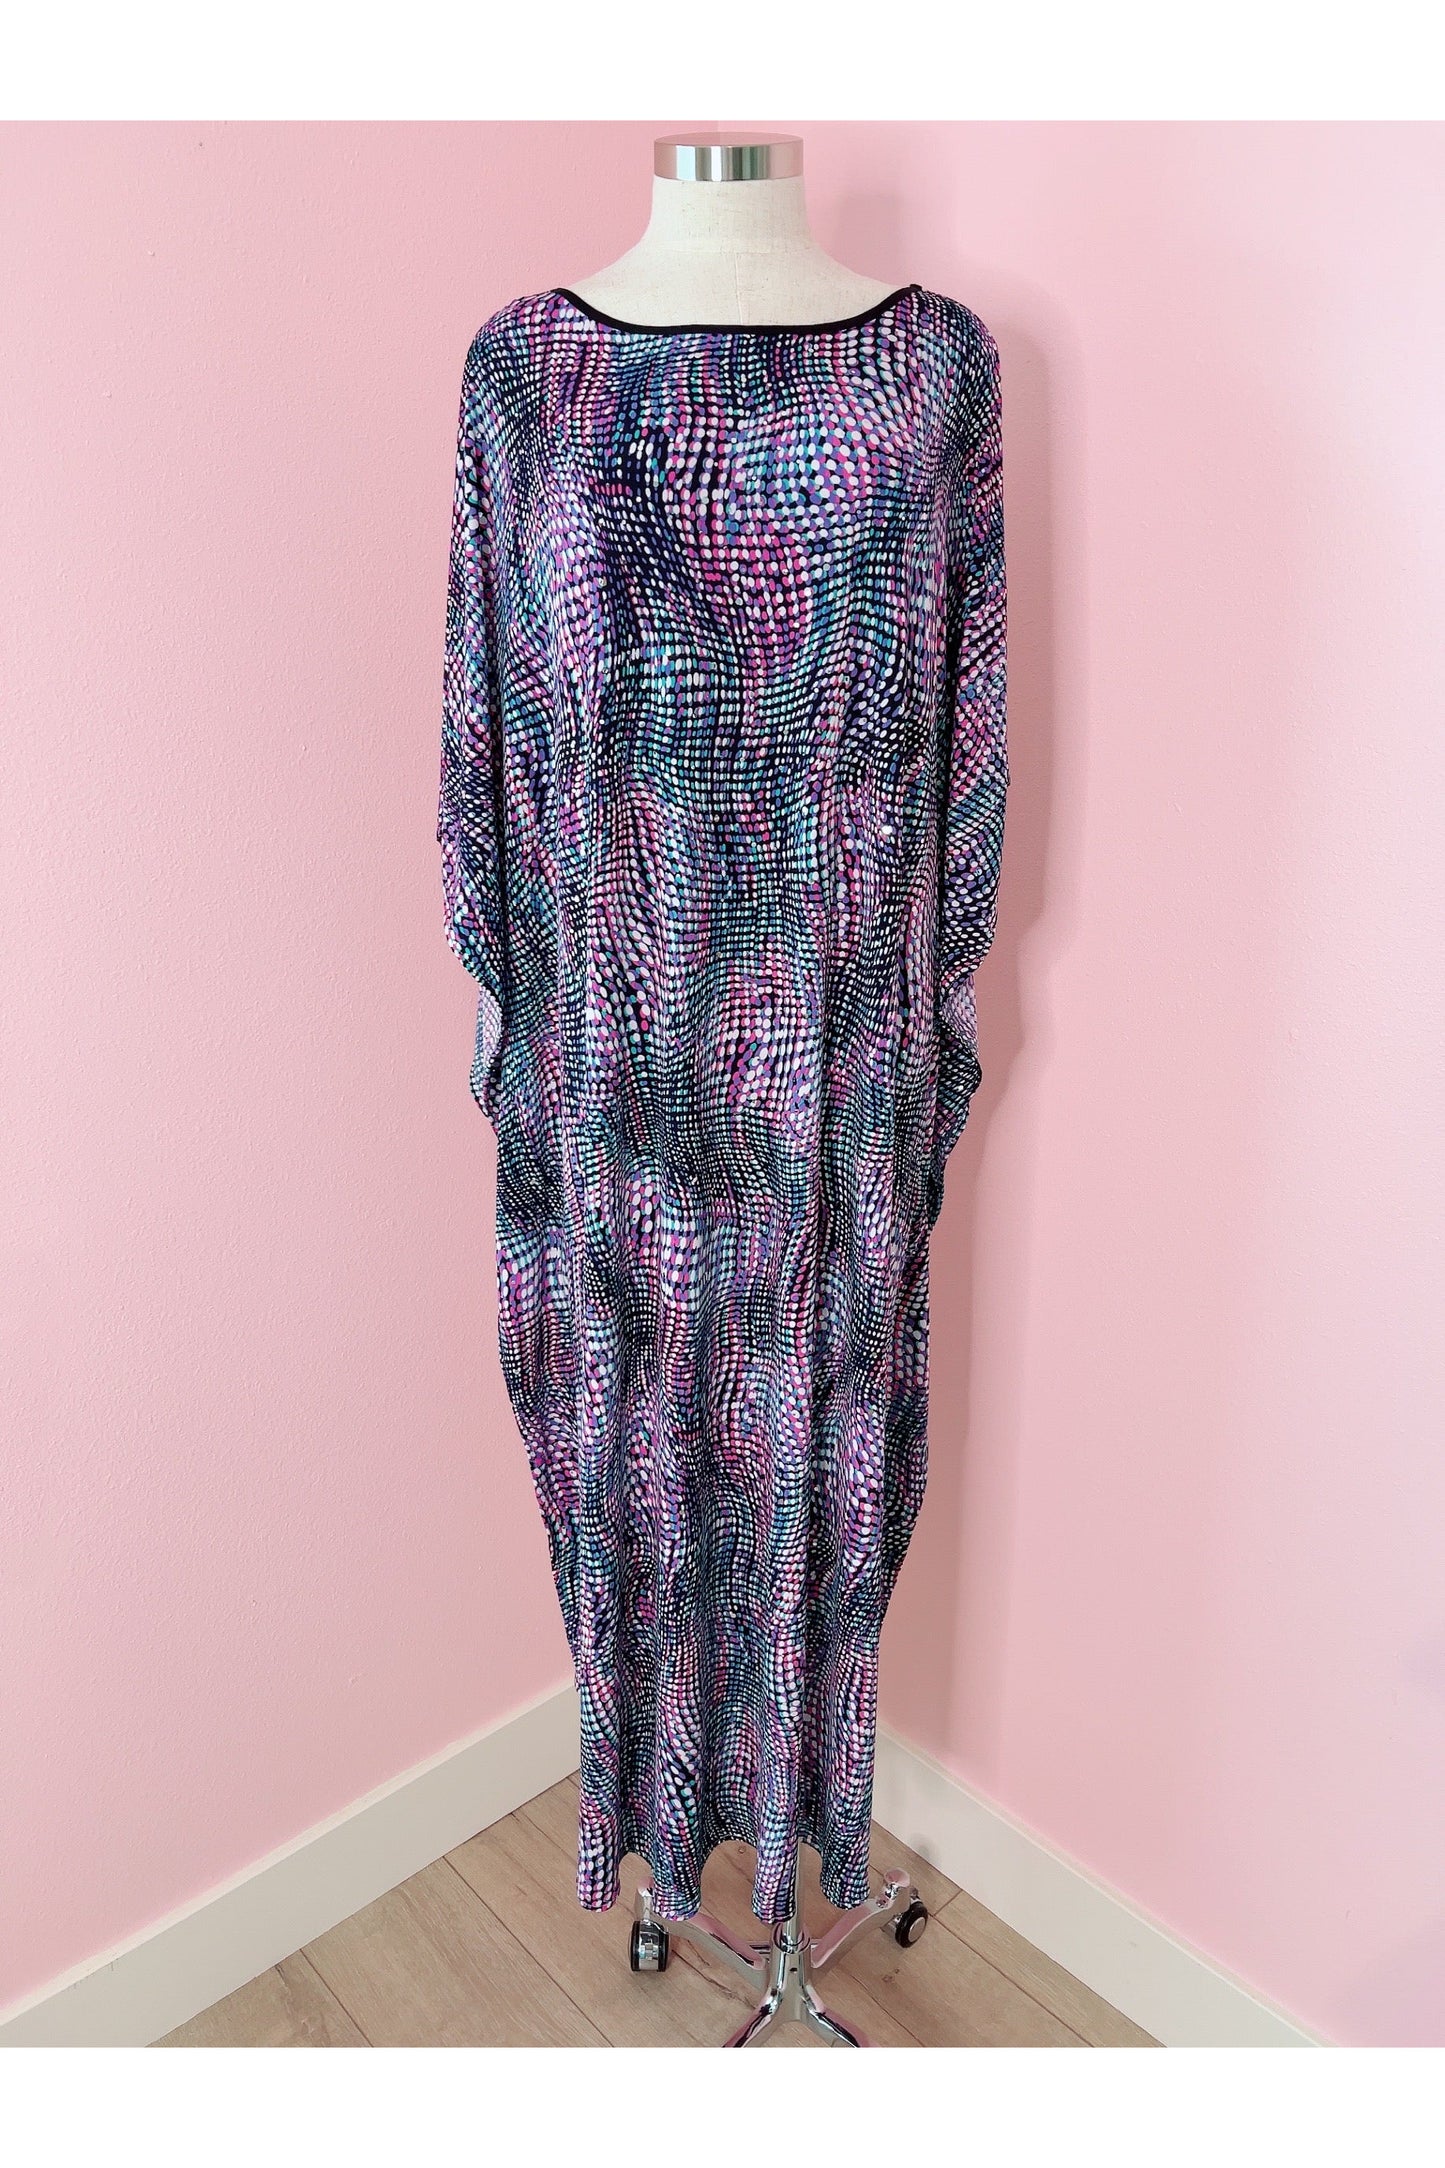 Studio 54 Party Caftan (Limited Edition)